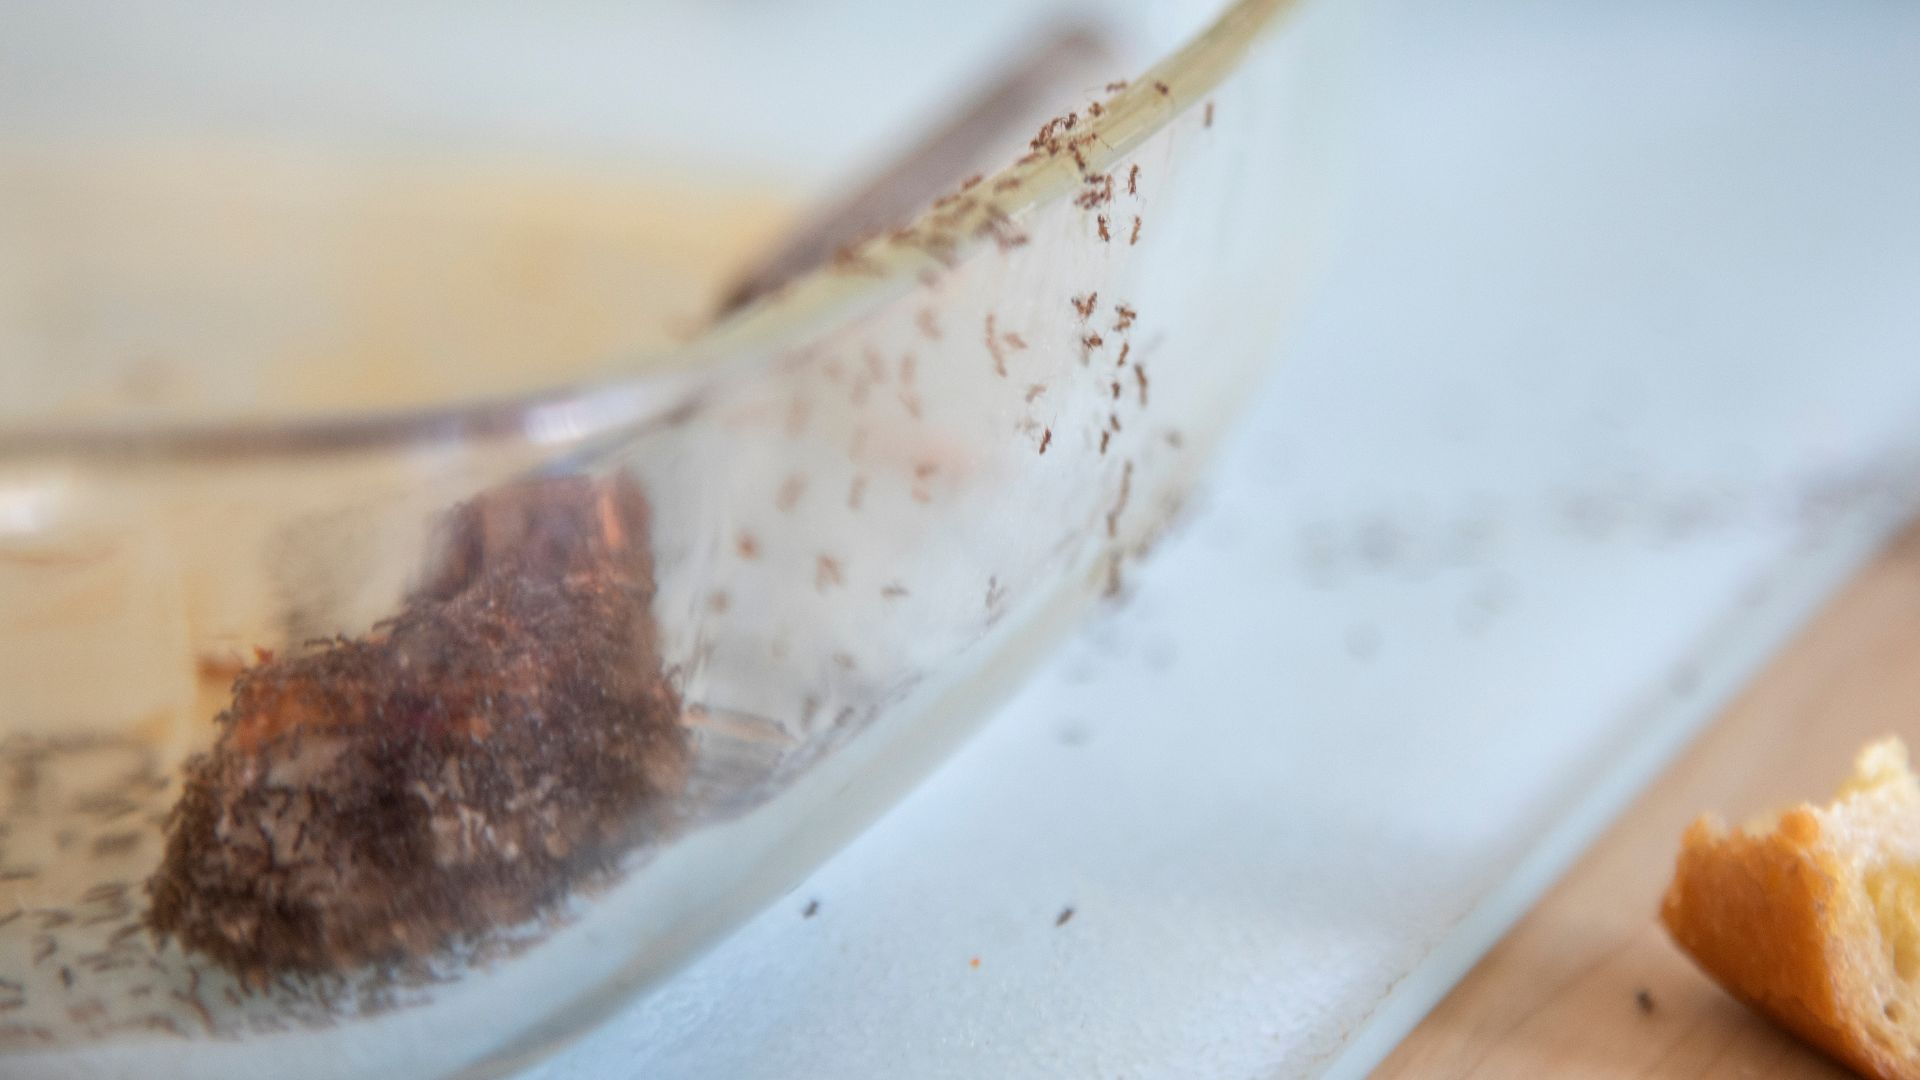 An image of very small brown ants eating leftover food out of an open glass tupperware container.